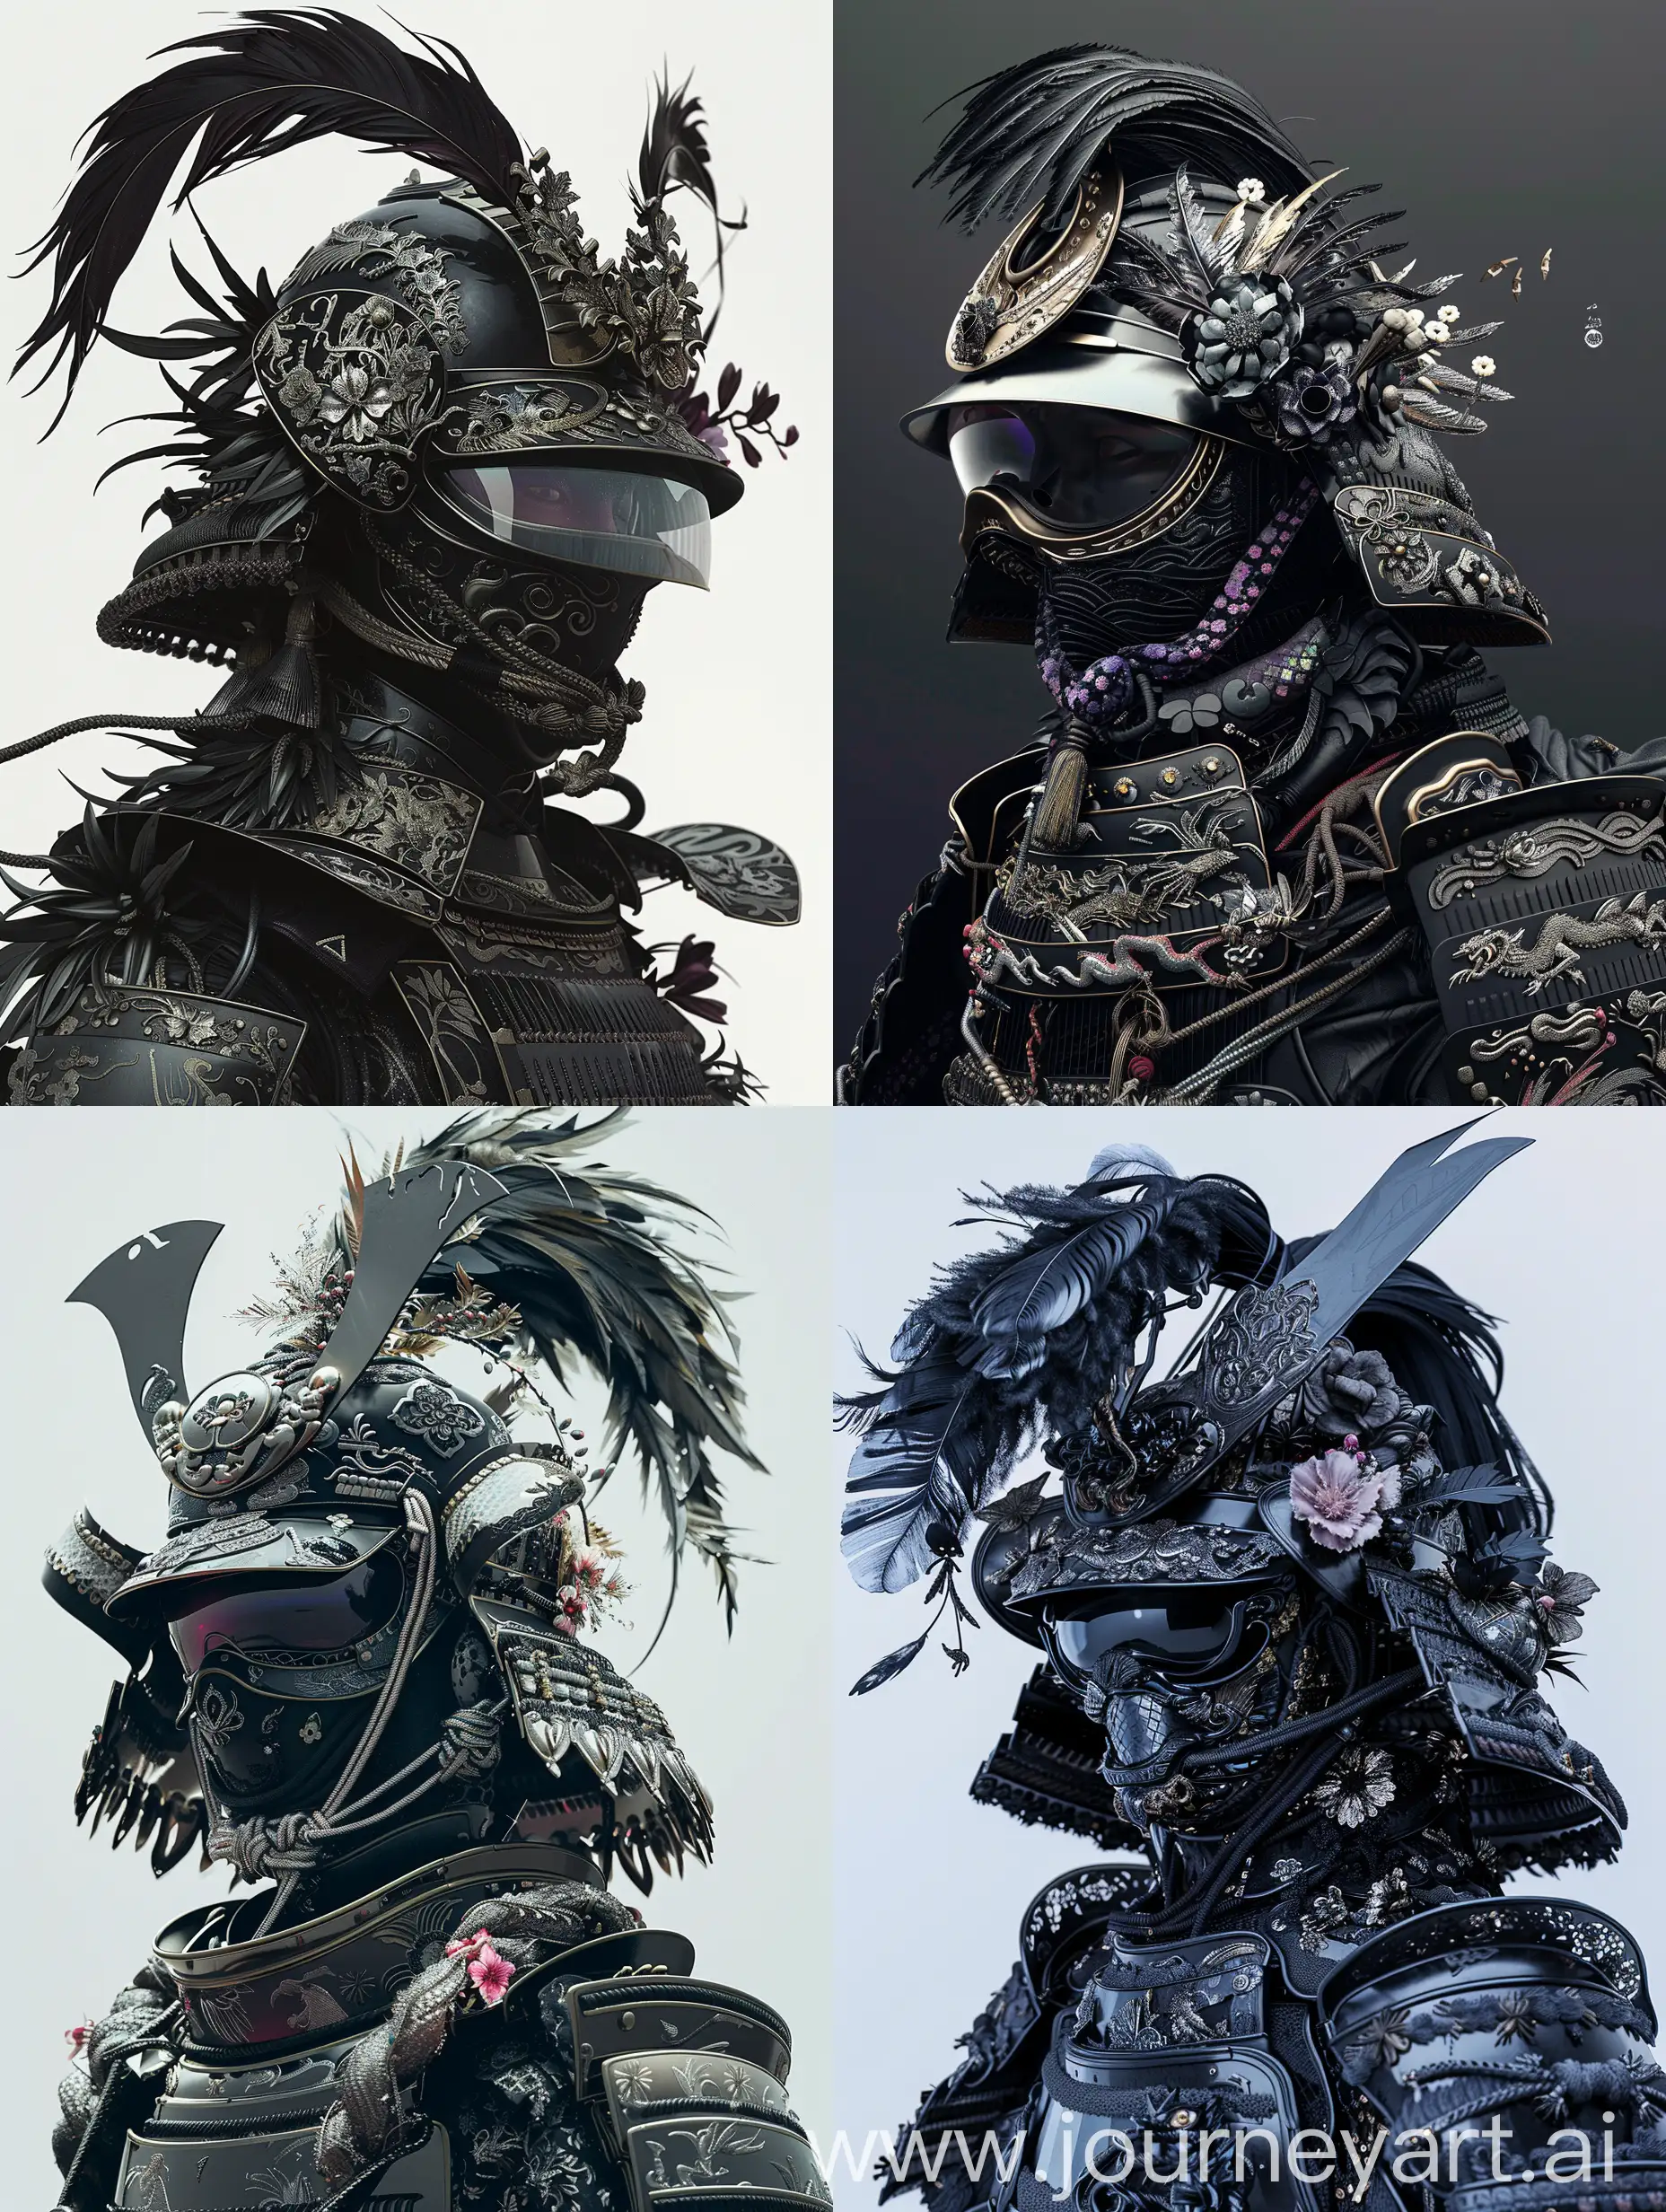 A highly detailed and ornate samurai warrior wears an elaborate suit of armor in various shades of black. The helmet features intricate decorations with feathered and floral elements, a large, curved crest, and detailed embellishments. The mask and armor plates are adorned with delicate patterns, including flowers and dragons, and the samurai's face is partially hidden behind tinted goggles. The overall color scheme is predominantly black, creating a visually striking and unique look. The armor gleams as if it were brand new."